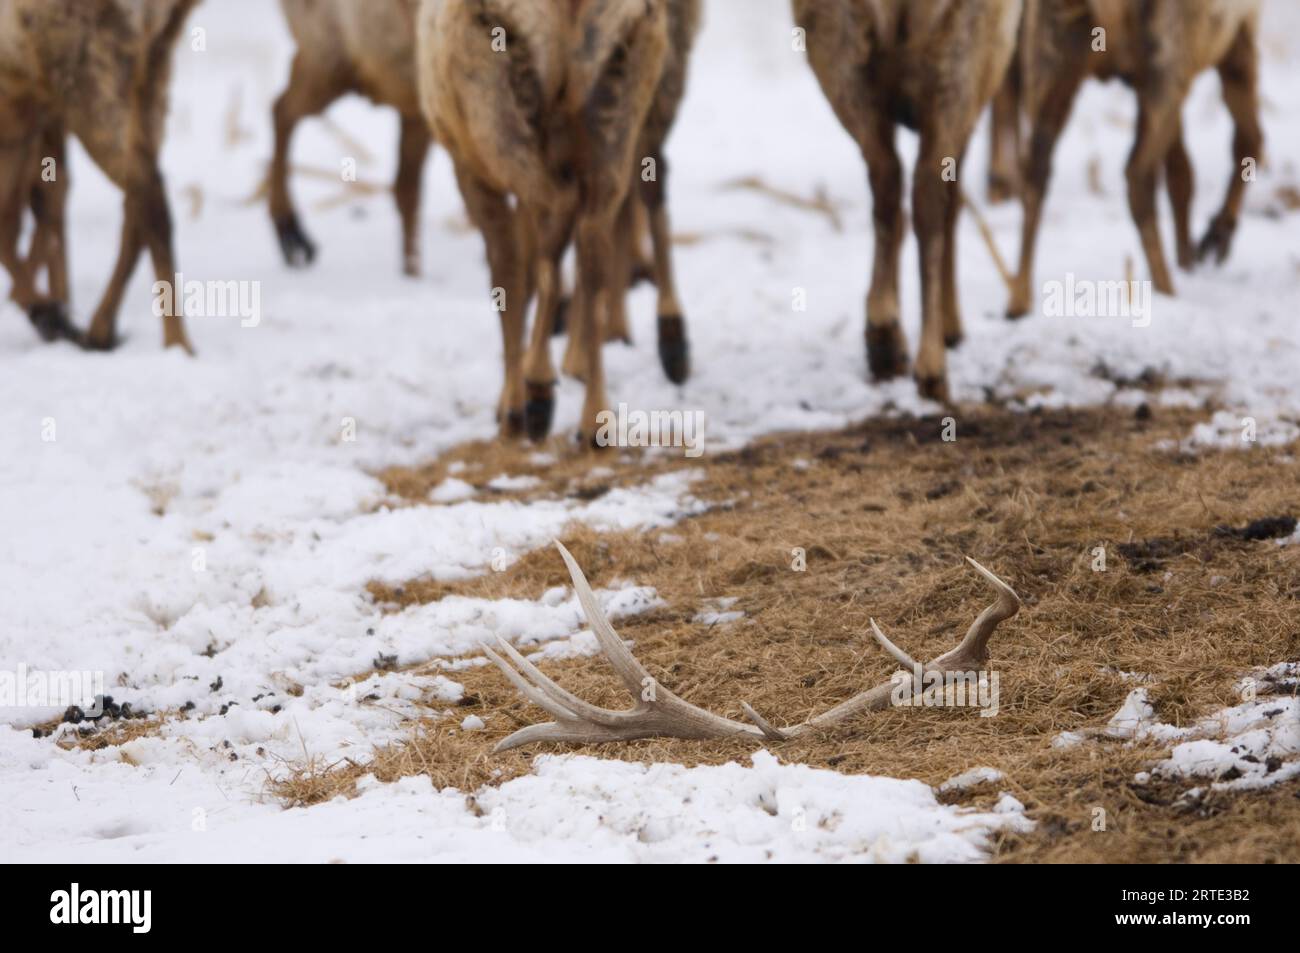 View of Elk (Cervus canadensis) legs walking in snow, with shed antlers lying on the ground in the foreground Stock Photo